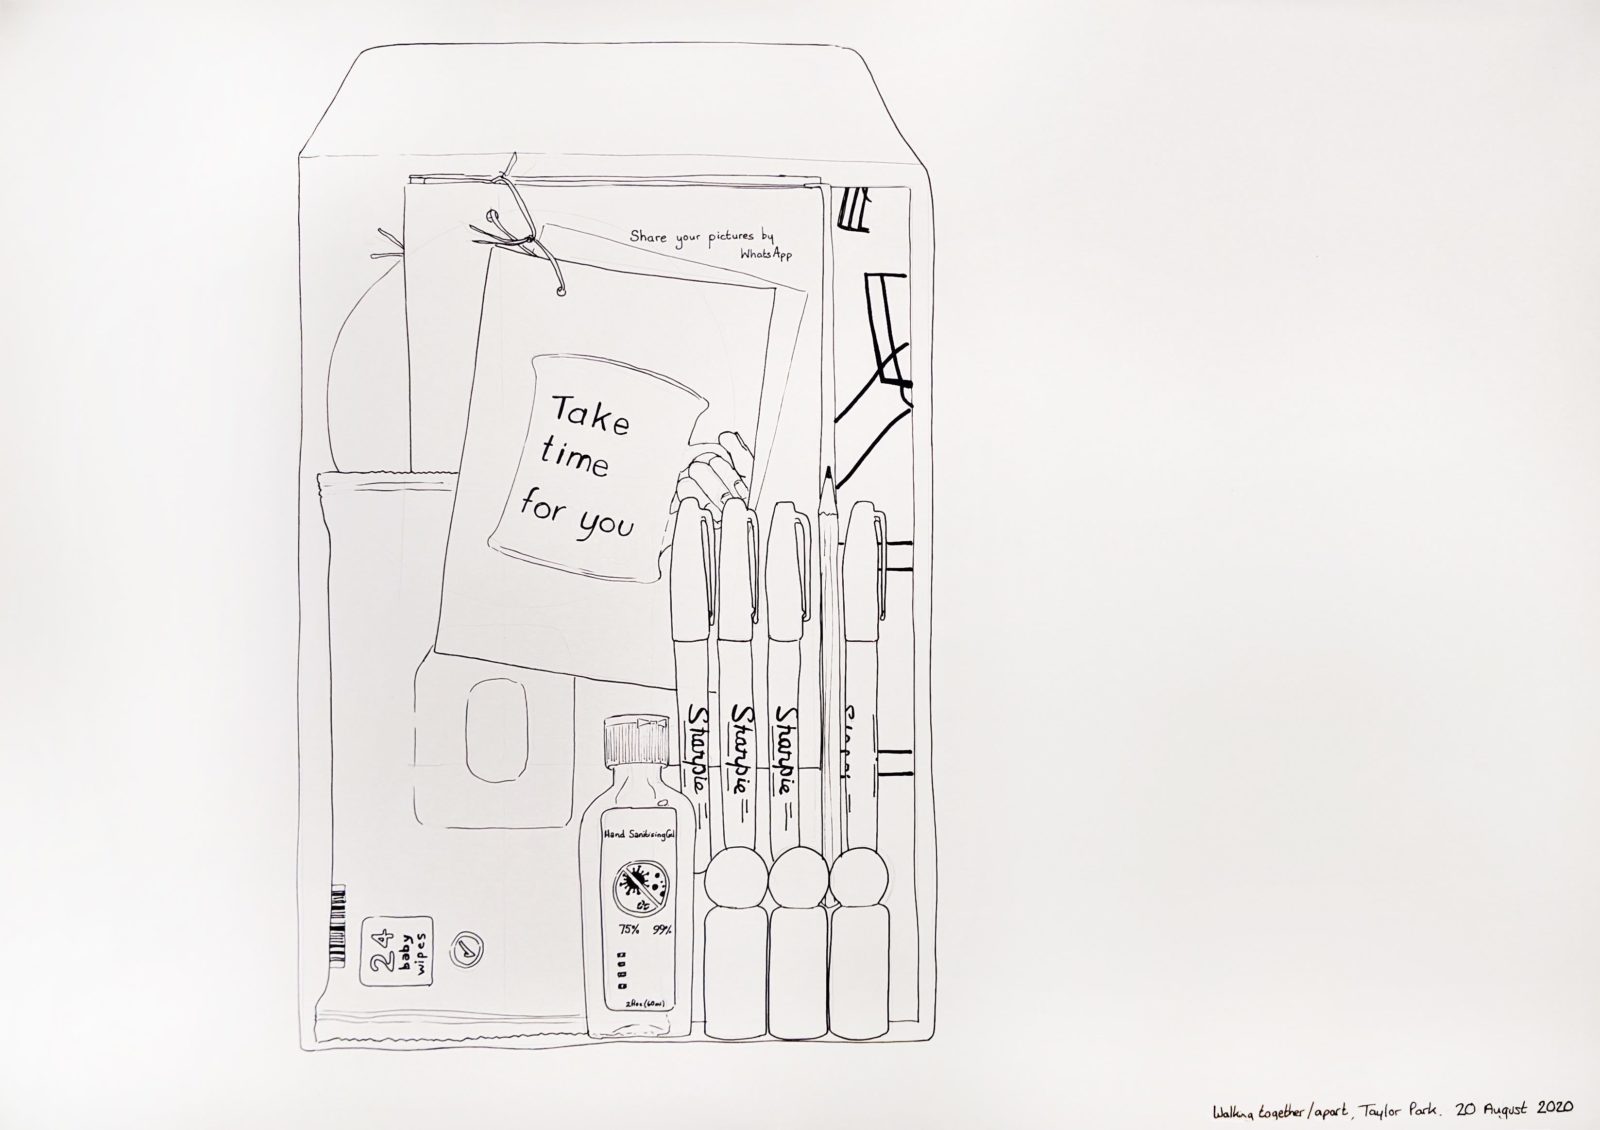 A black and white line drawing of an envelope with pens, wipes, hand sanitizer among other items.